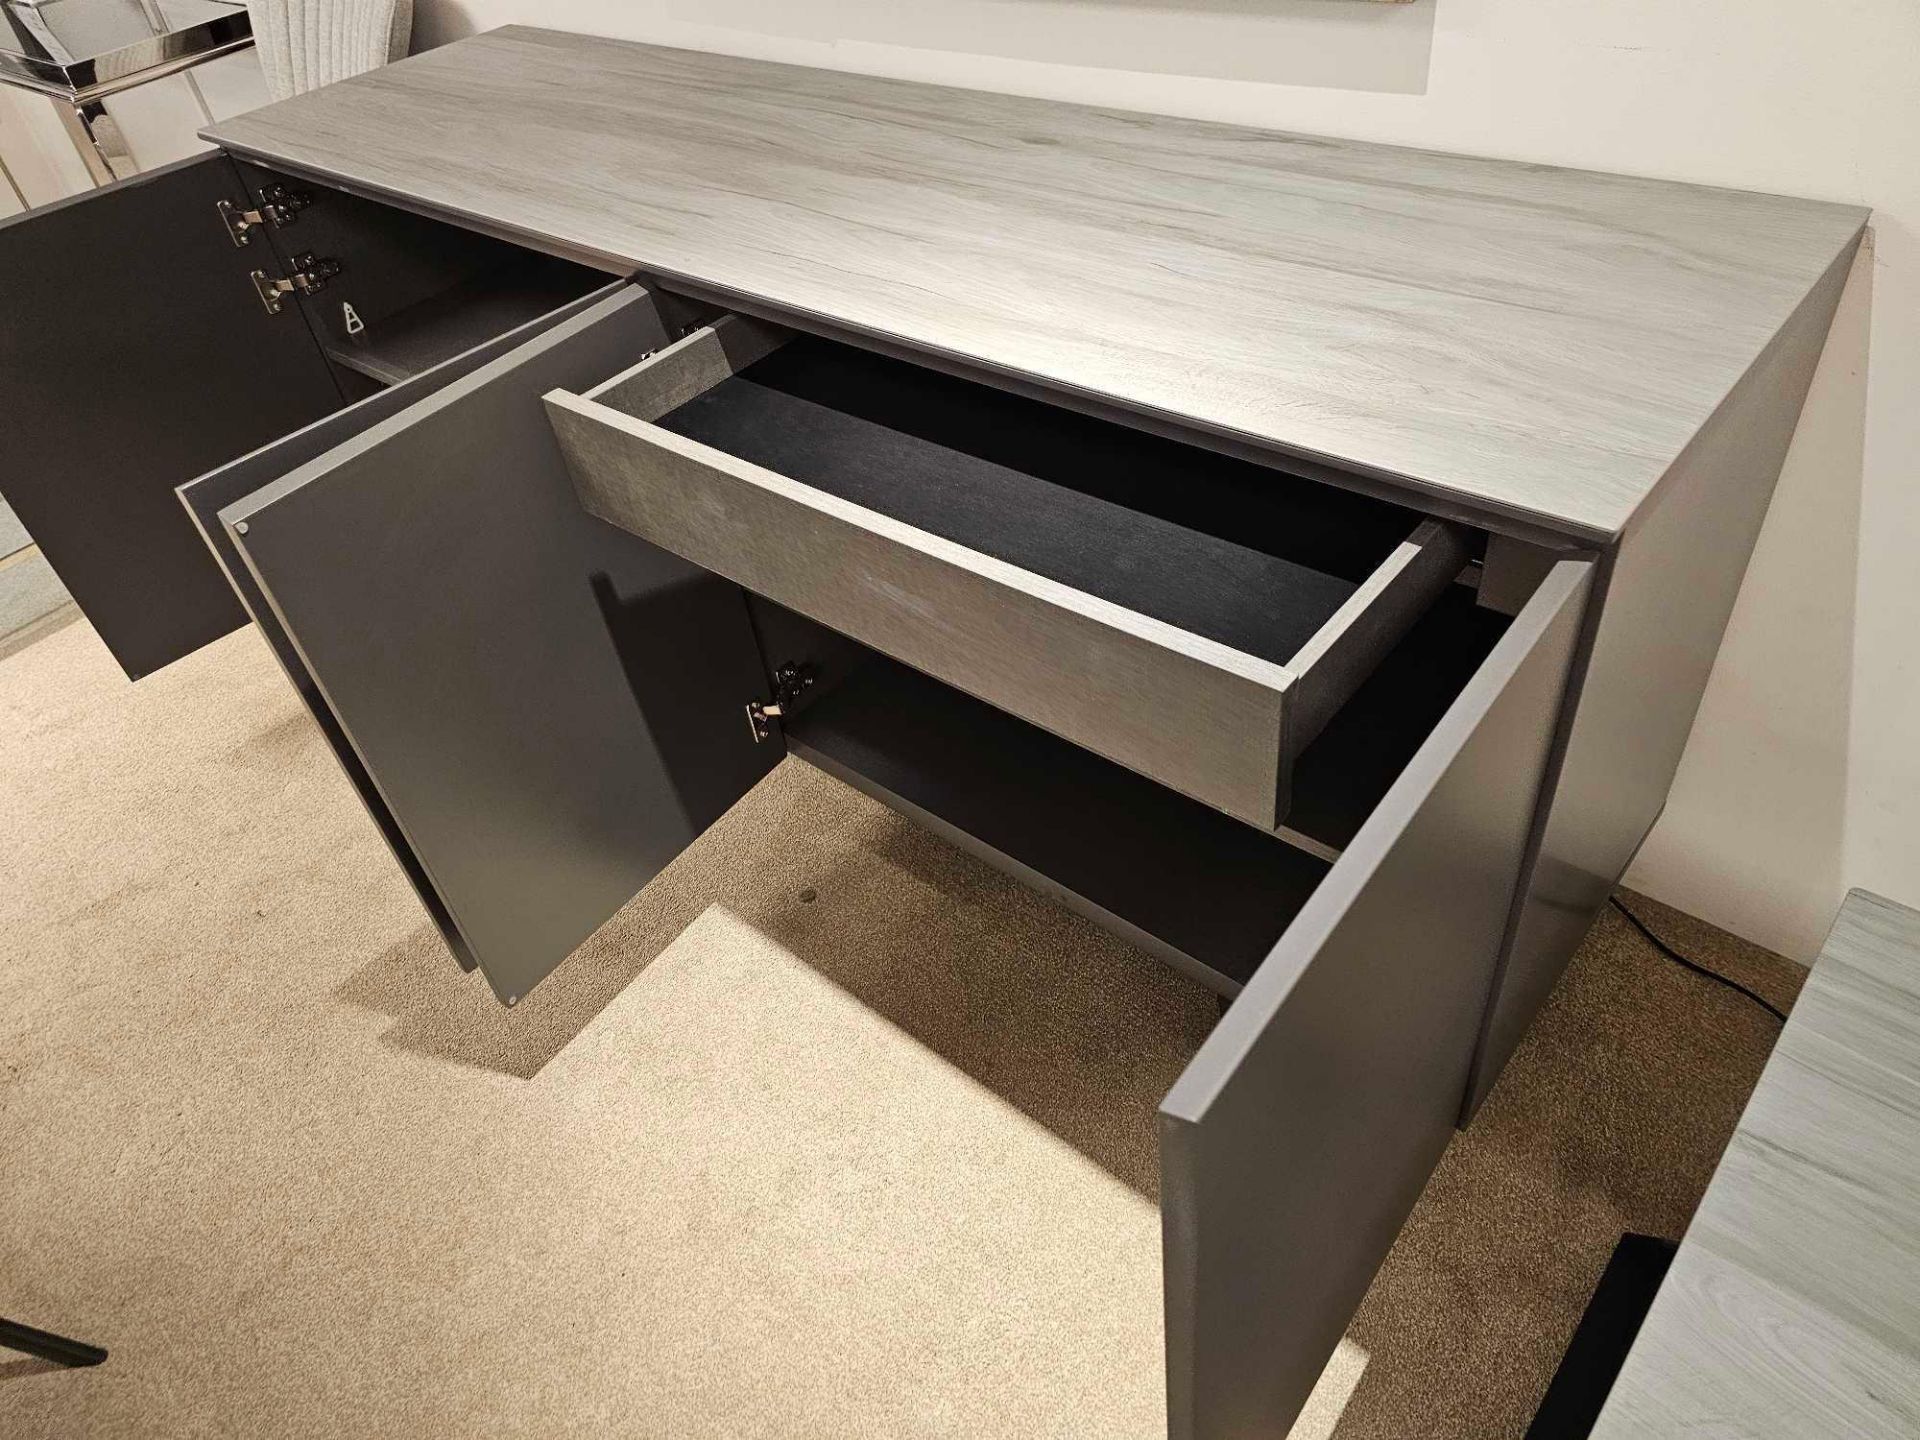 Spartan Sideboard by Kesterport The Spartan Four Door Sideboard provides is striking as a stand - Bild 9 aus 12